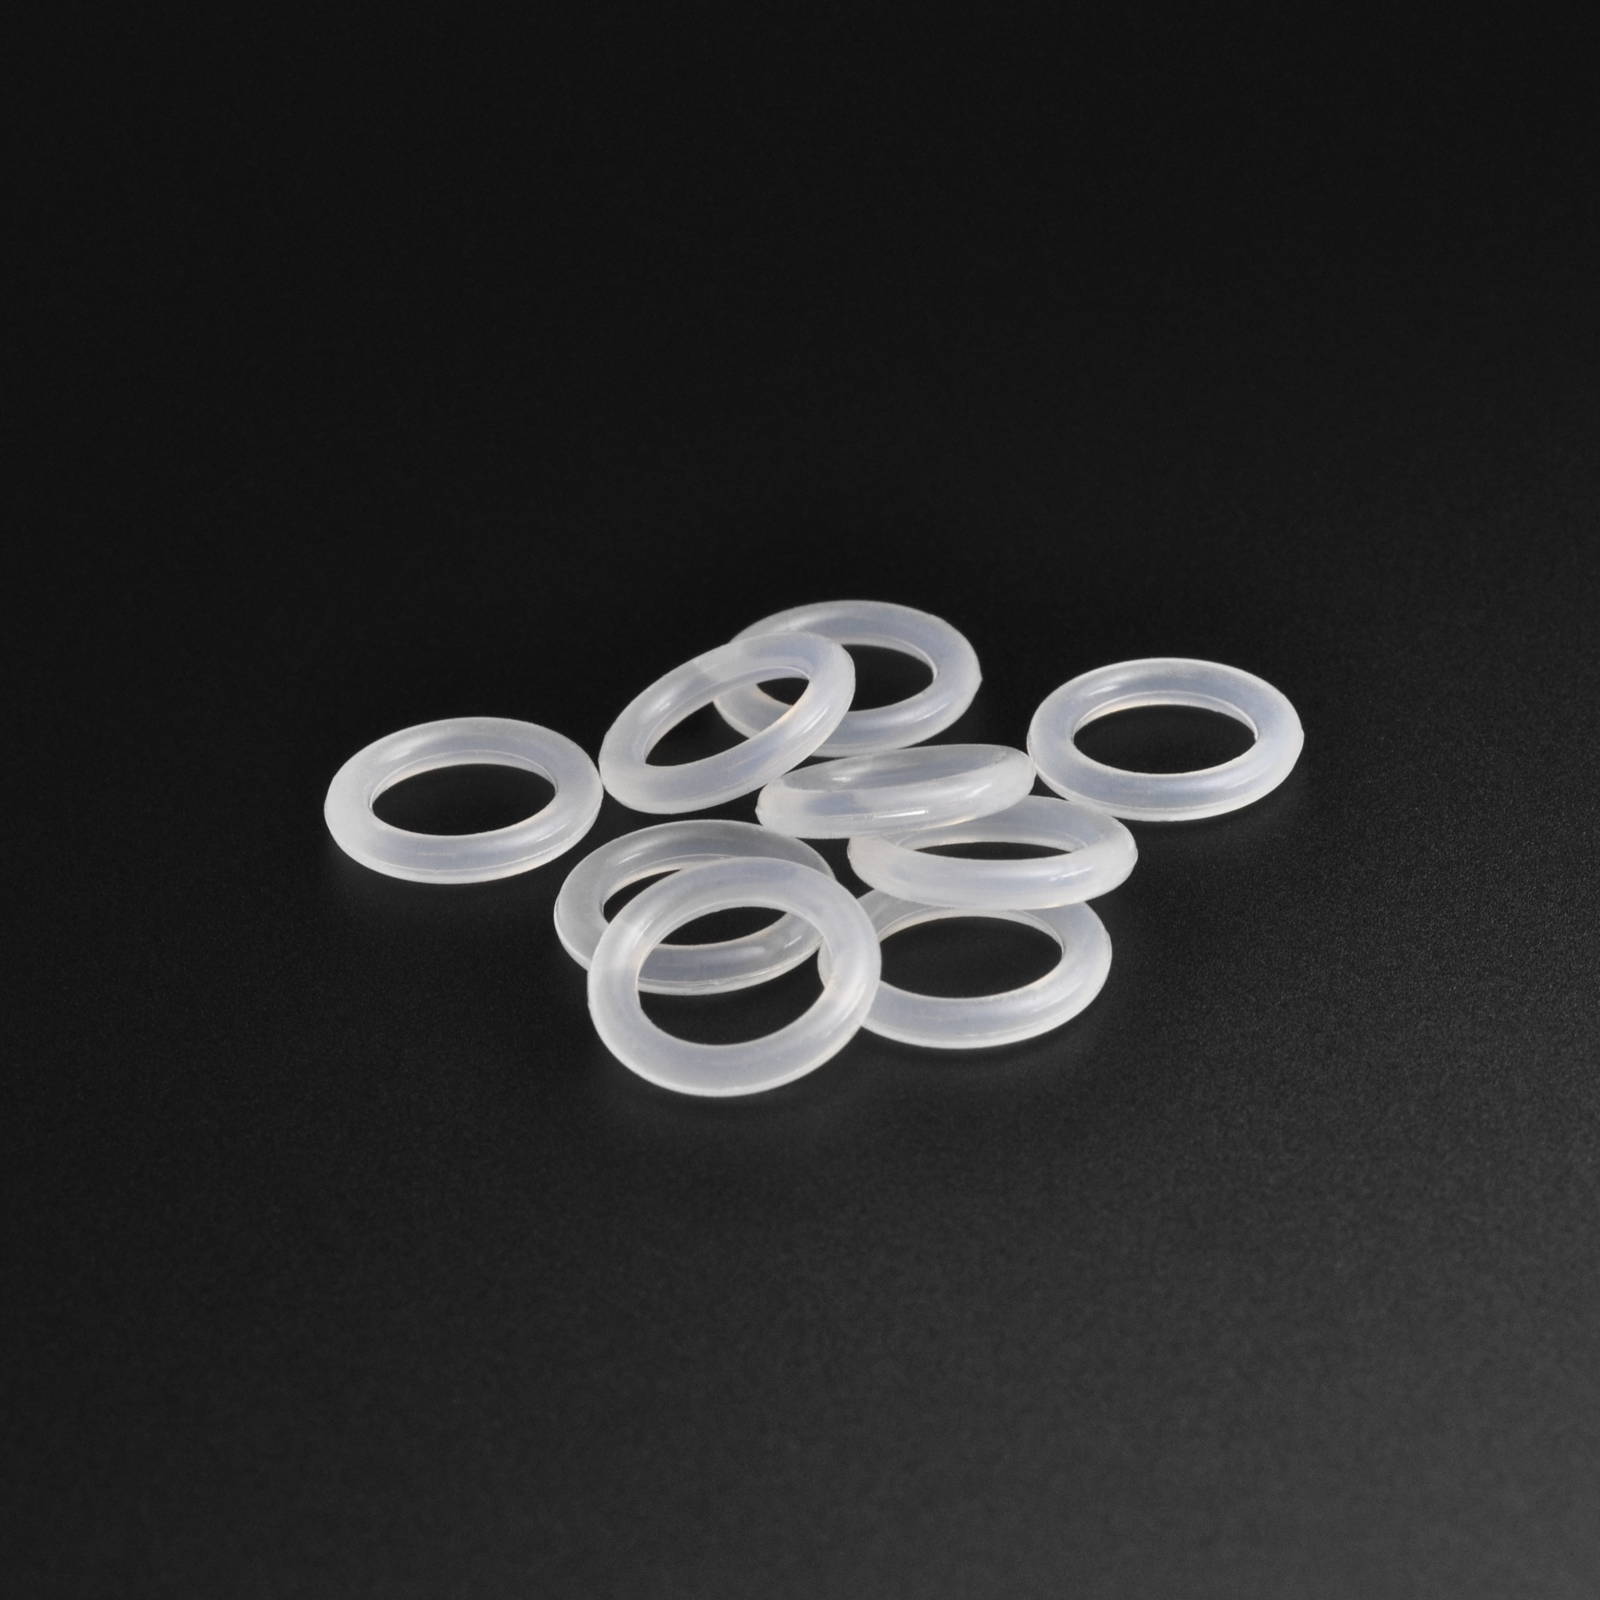 Clear silicone o-rings